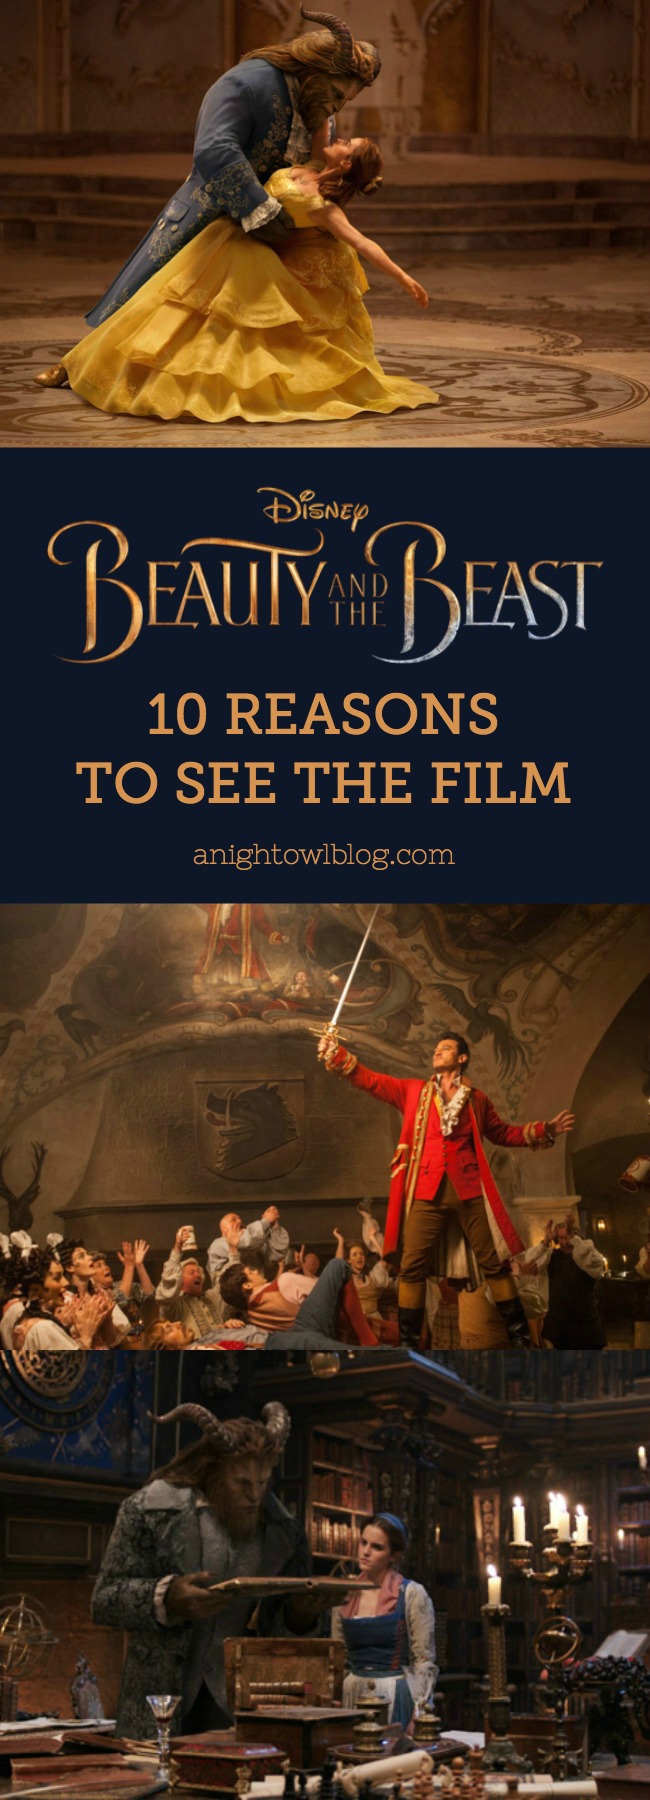 Get a Sneak Peek without spoilers and discover 10 Reasons to See Disney's Beauty and the Beast!